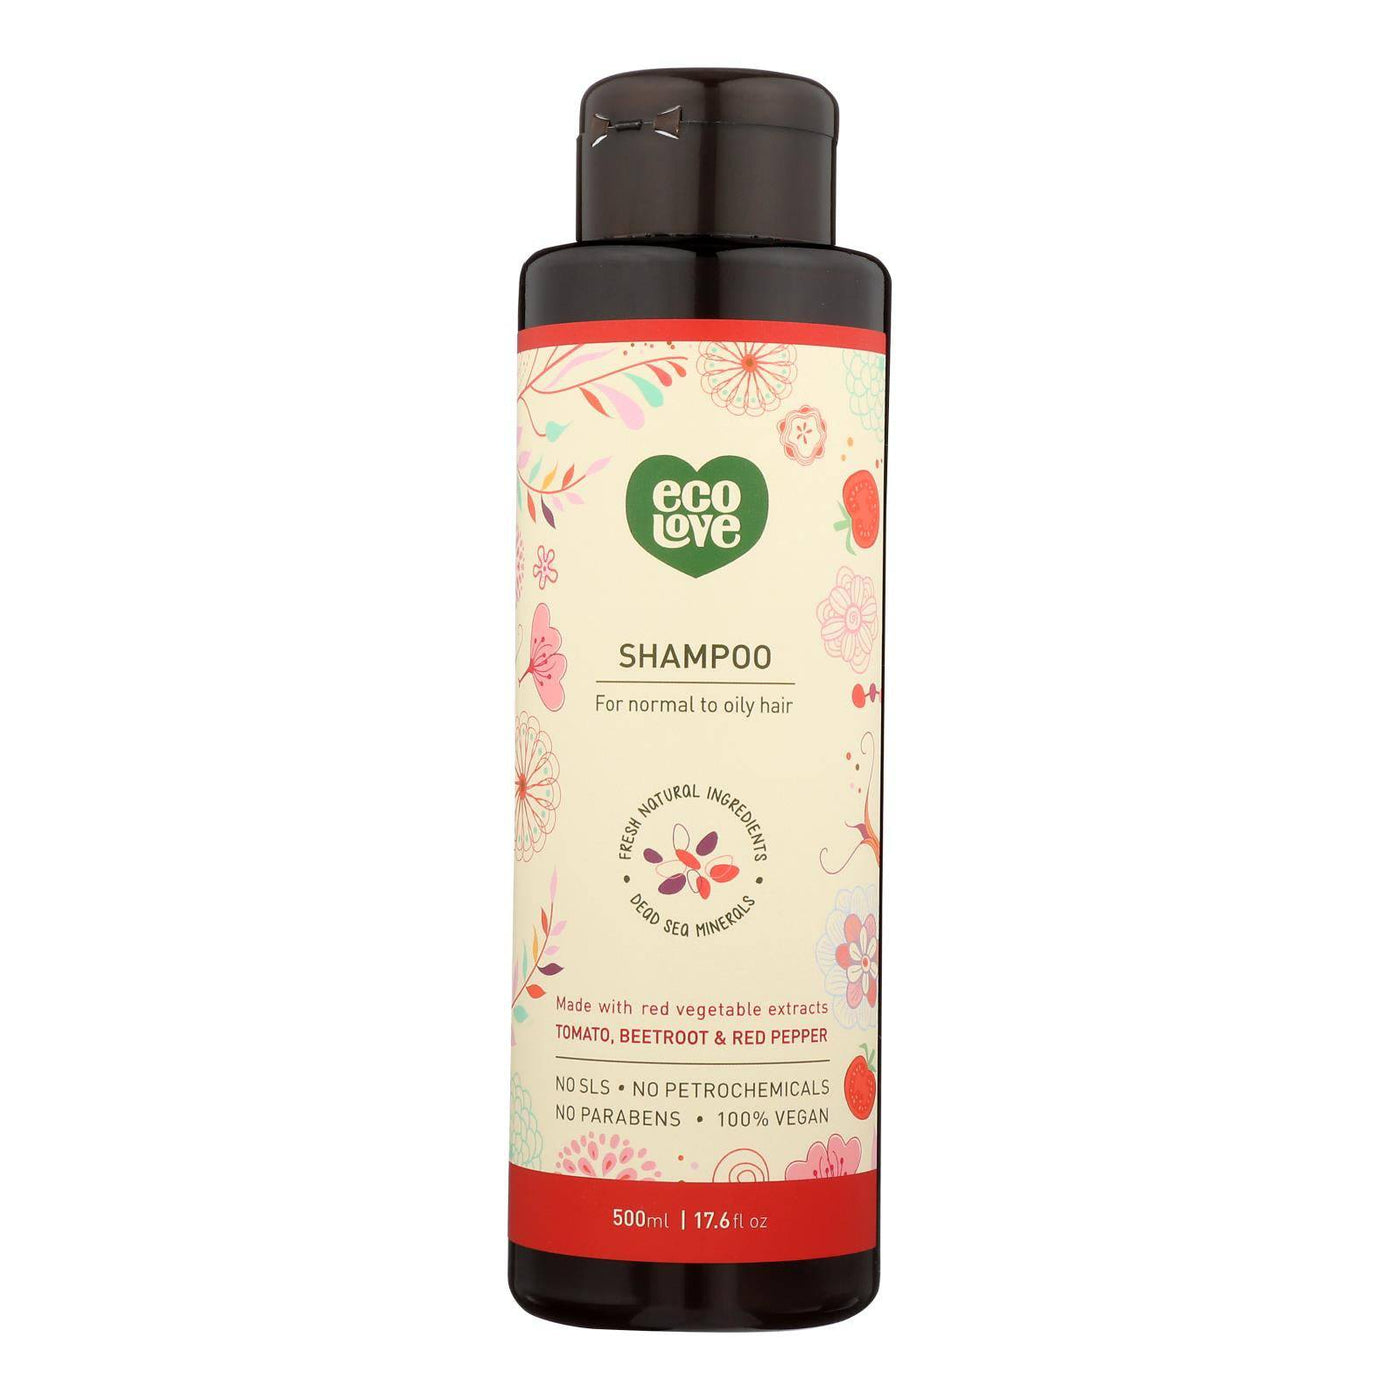 Buy Ecolove Shampoo - Red Vegetables Shampoofor Normal To Oily Hair - Case Of 1 - 17.6 Fl Oz.  at OnlyNaturals.us